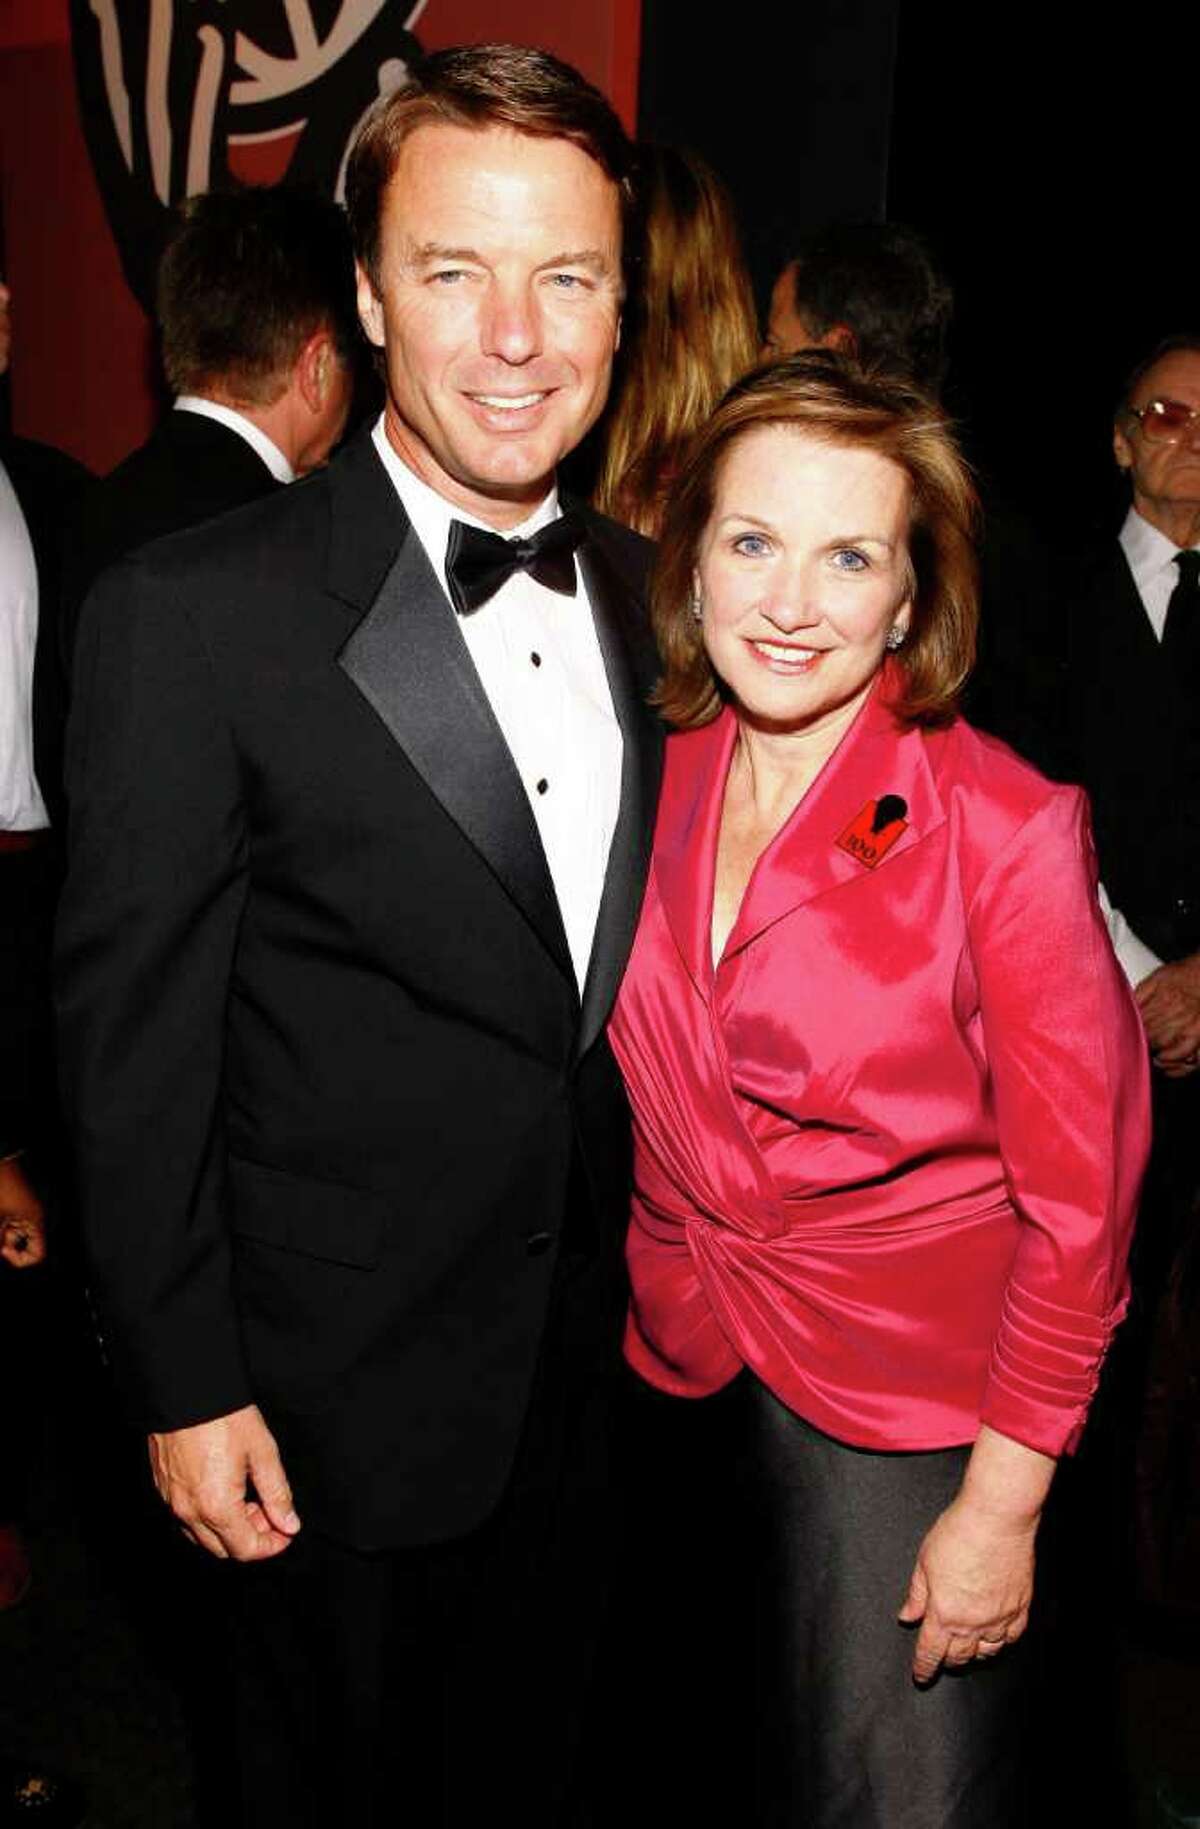 NEW YORK - MAY 8: (L-R) John Edwards and Elizabeth Edwards attend the cocktail party before the Time Magazine's 100 Most Influential People 2007 gala on May 8, 2007 in New York City. (Photo by Mat Szwajkos/Getty Images) *** Local Caption *** John Edwards;Elizabeth Edwards